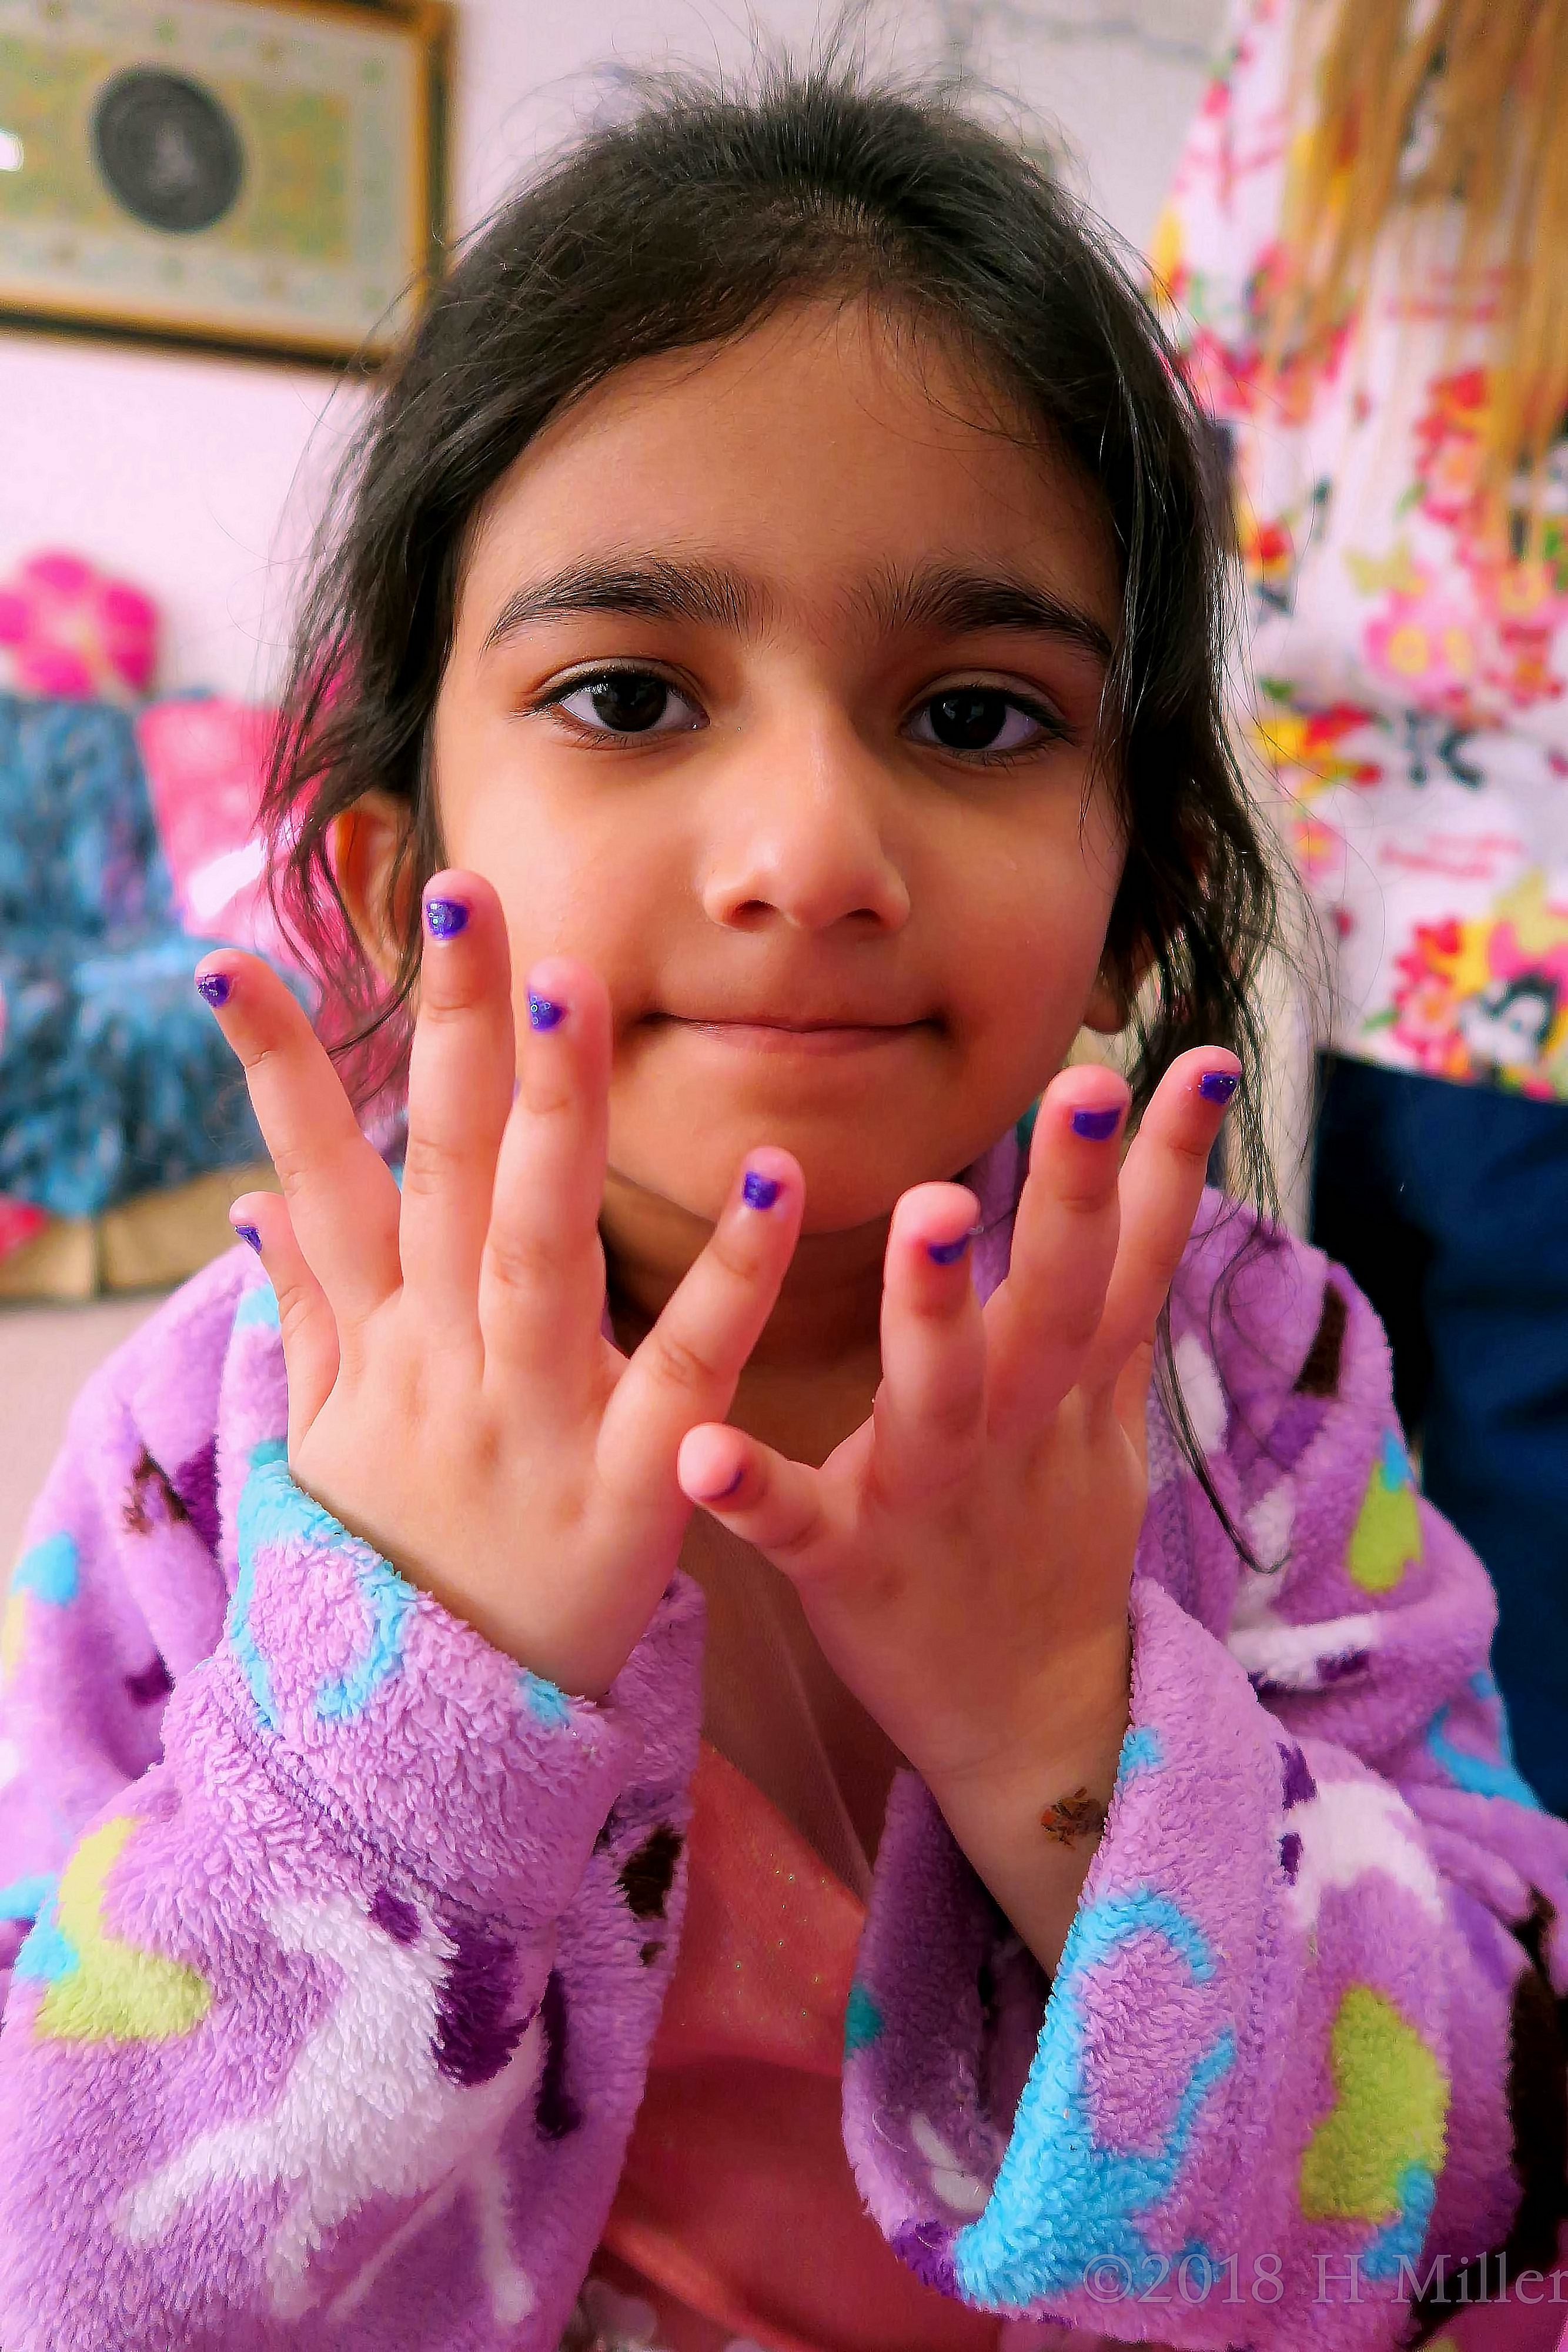 Purple And Blue Are Stunning! Amazing Blue Kids Manicure And A Purple Horse Spa Robe!